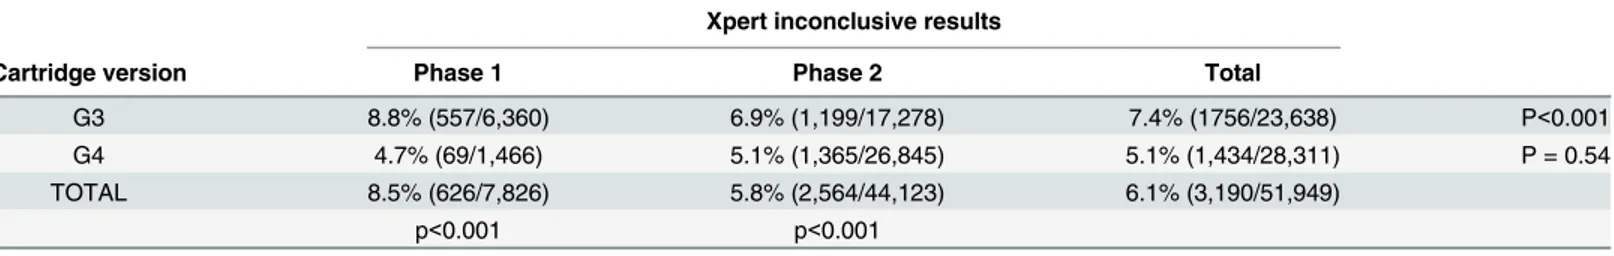 Table 9. Inconclusive Xpert results by implementation phase and cartridge version.